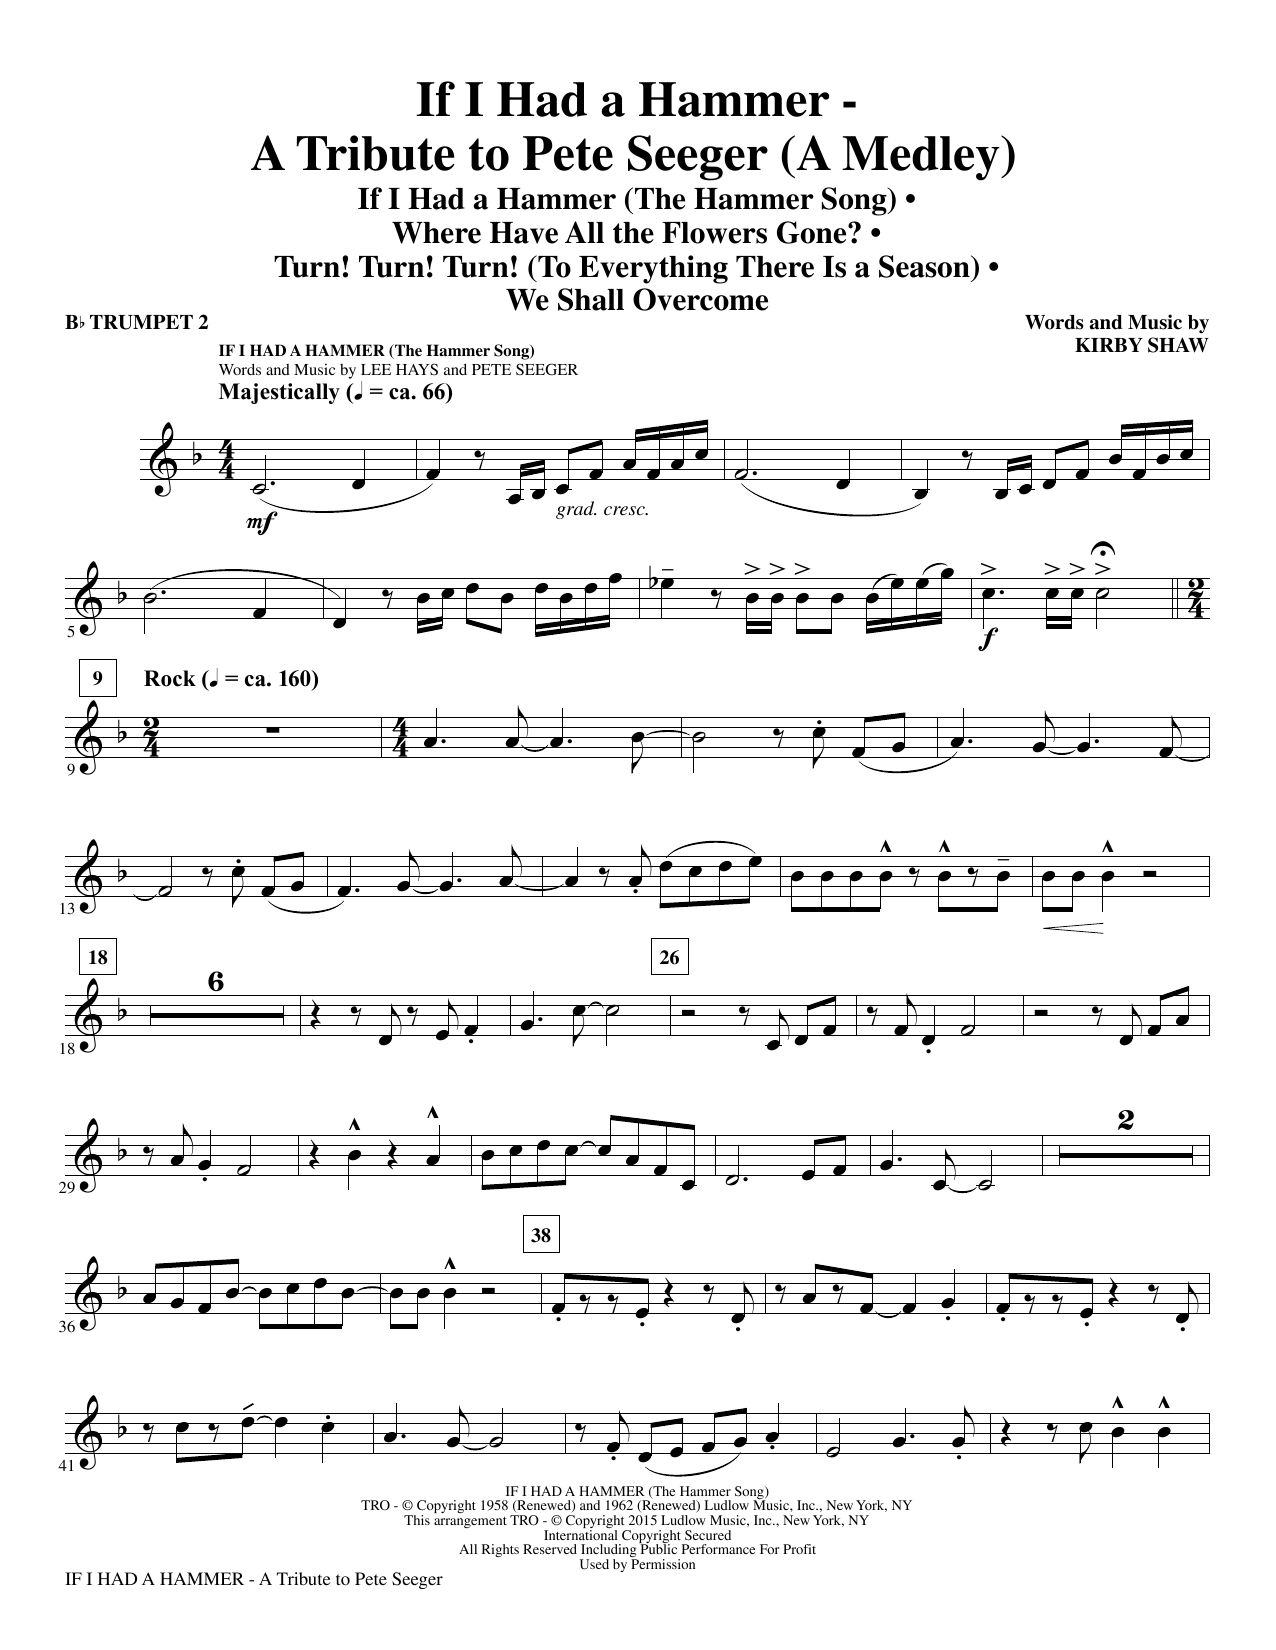 Kirby Shaw If I Had A Hammer - A Tribute to Pete Seeger - Bb Trumpet 2 sheet music notes and chords. Download Printable PDF.